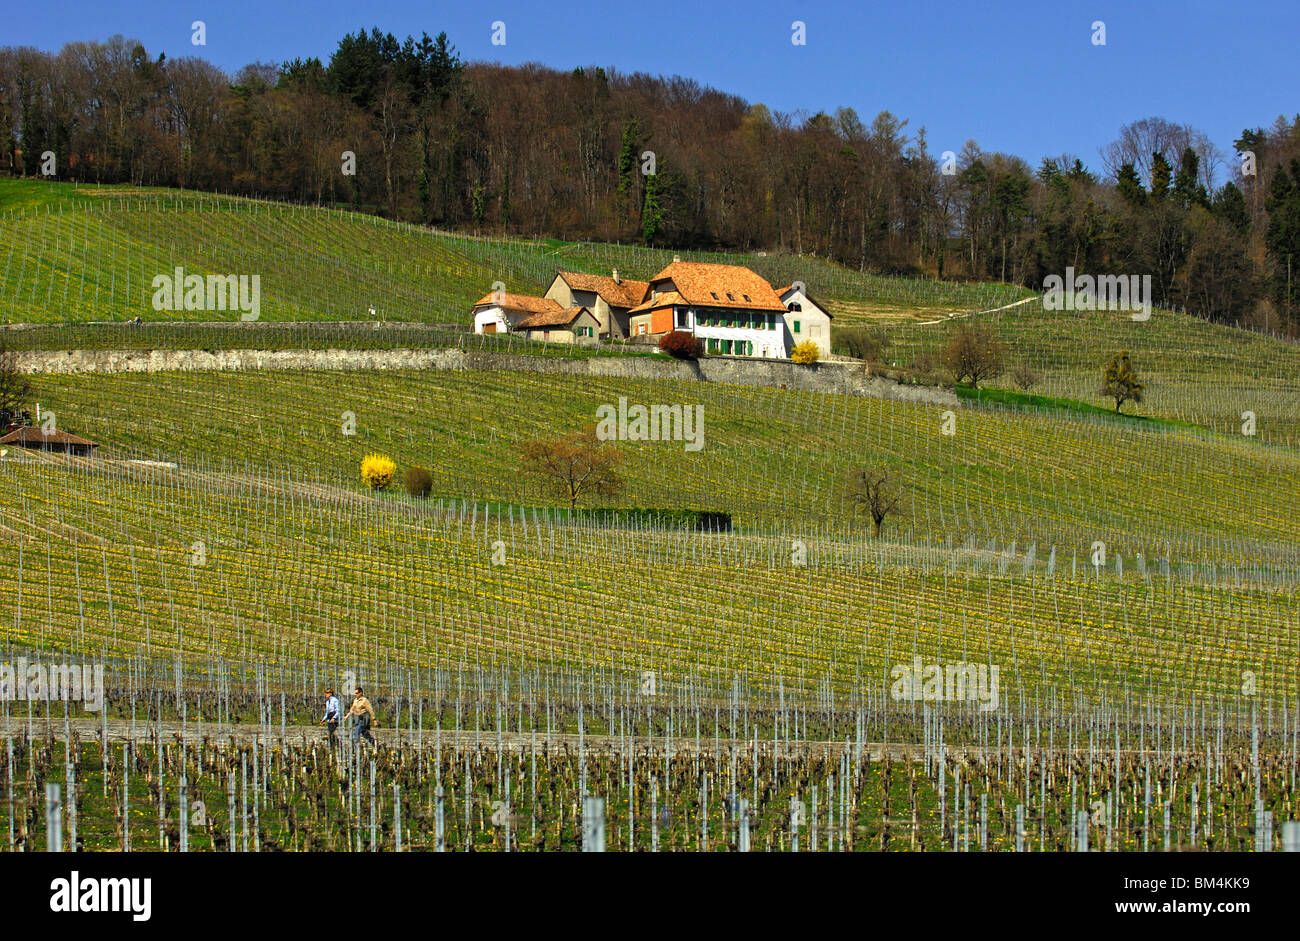 Vinyard for Chasselas grapes at the foot of the Jura mountain range in springtime, Begnins, Vaud, Switzerland Stock Photo